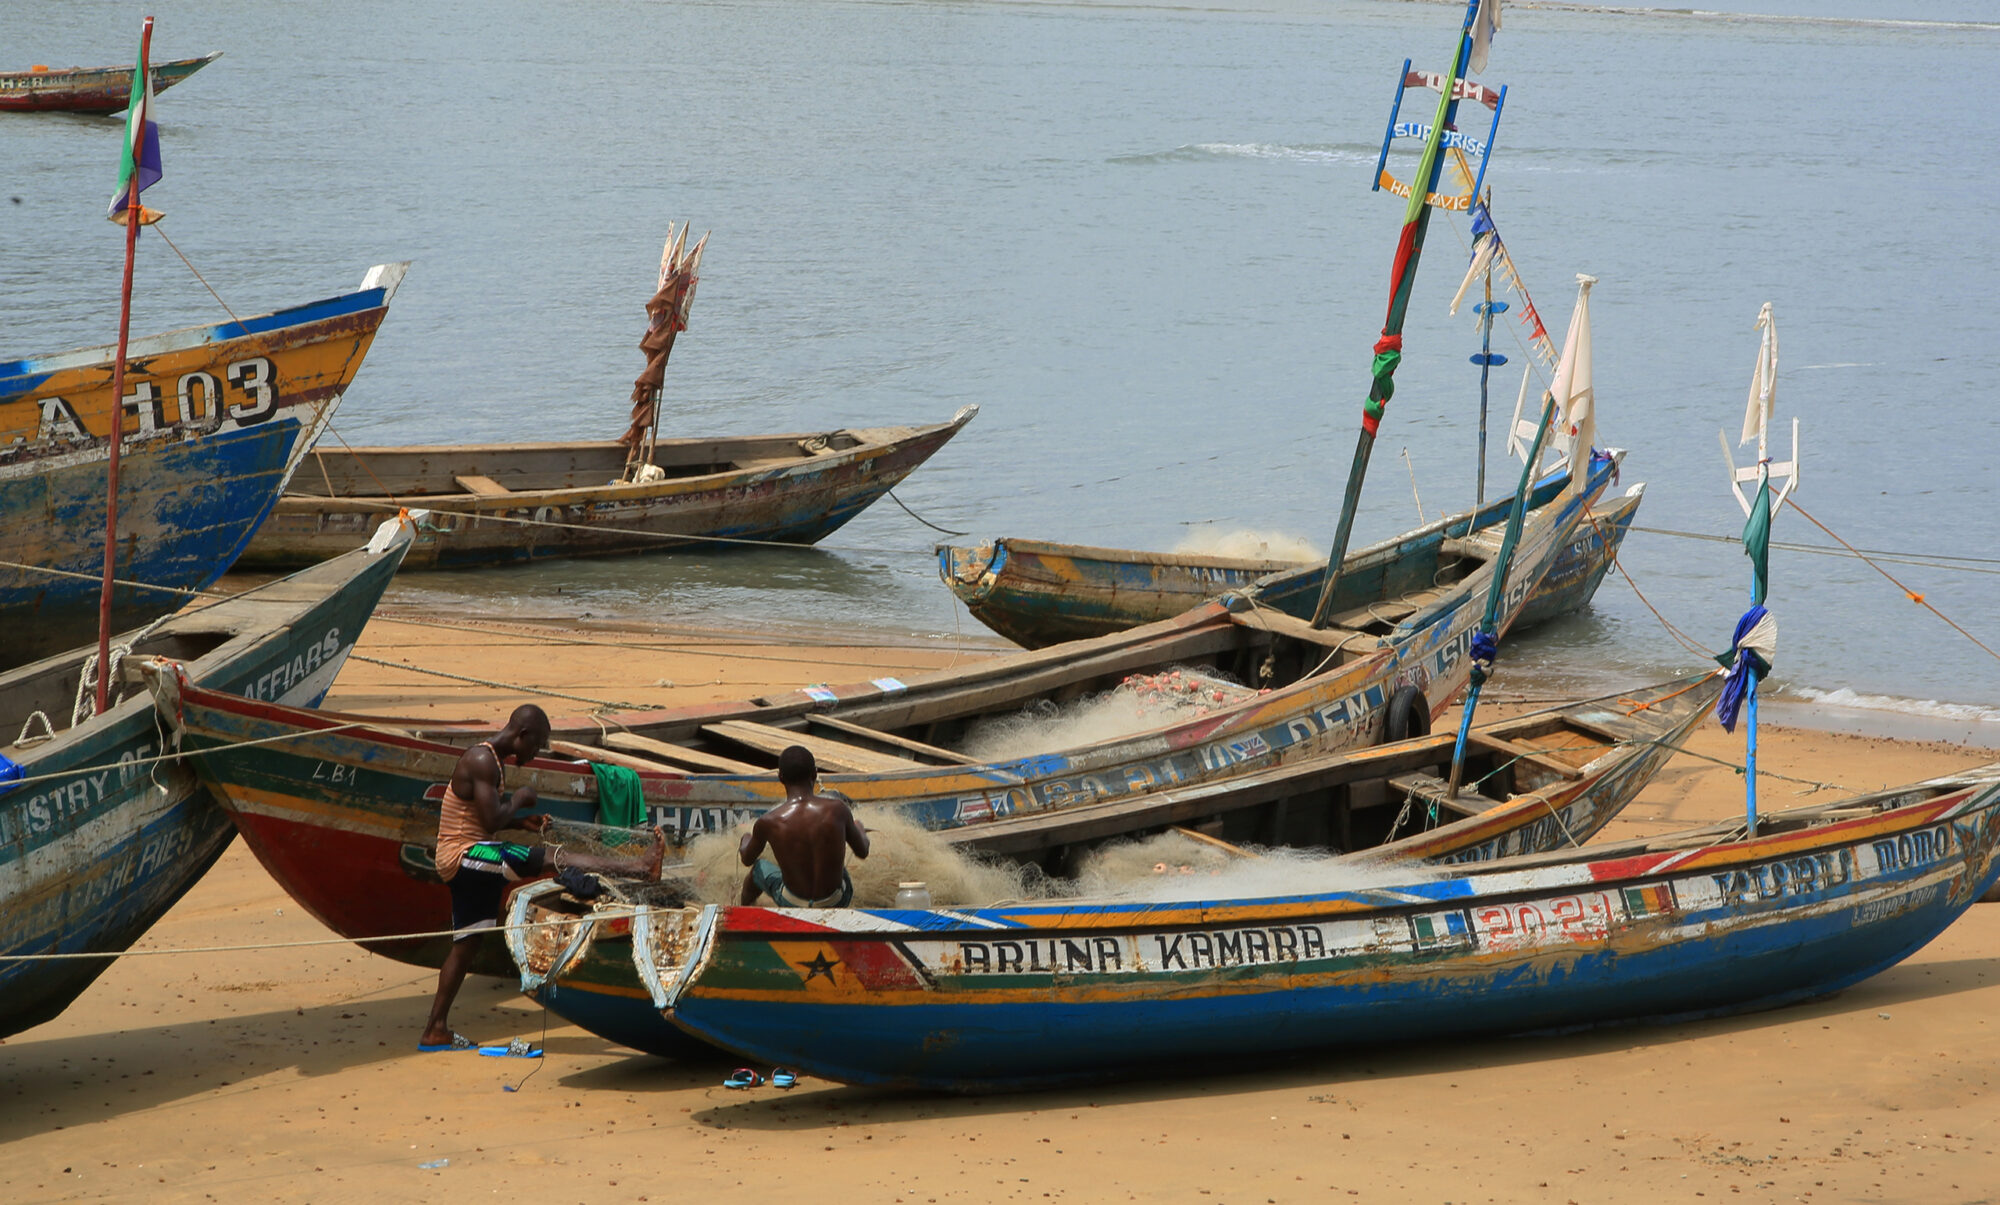 Sea level rise sierra leone: Local fishers use small wooden boats, and often have to travel long distances and face dangerous weather conditions to bring back a catch